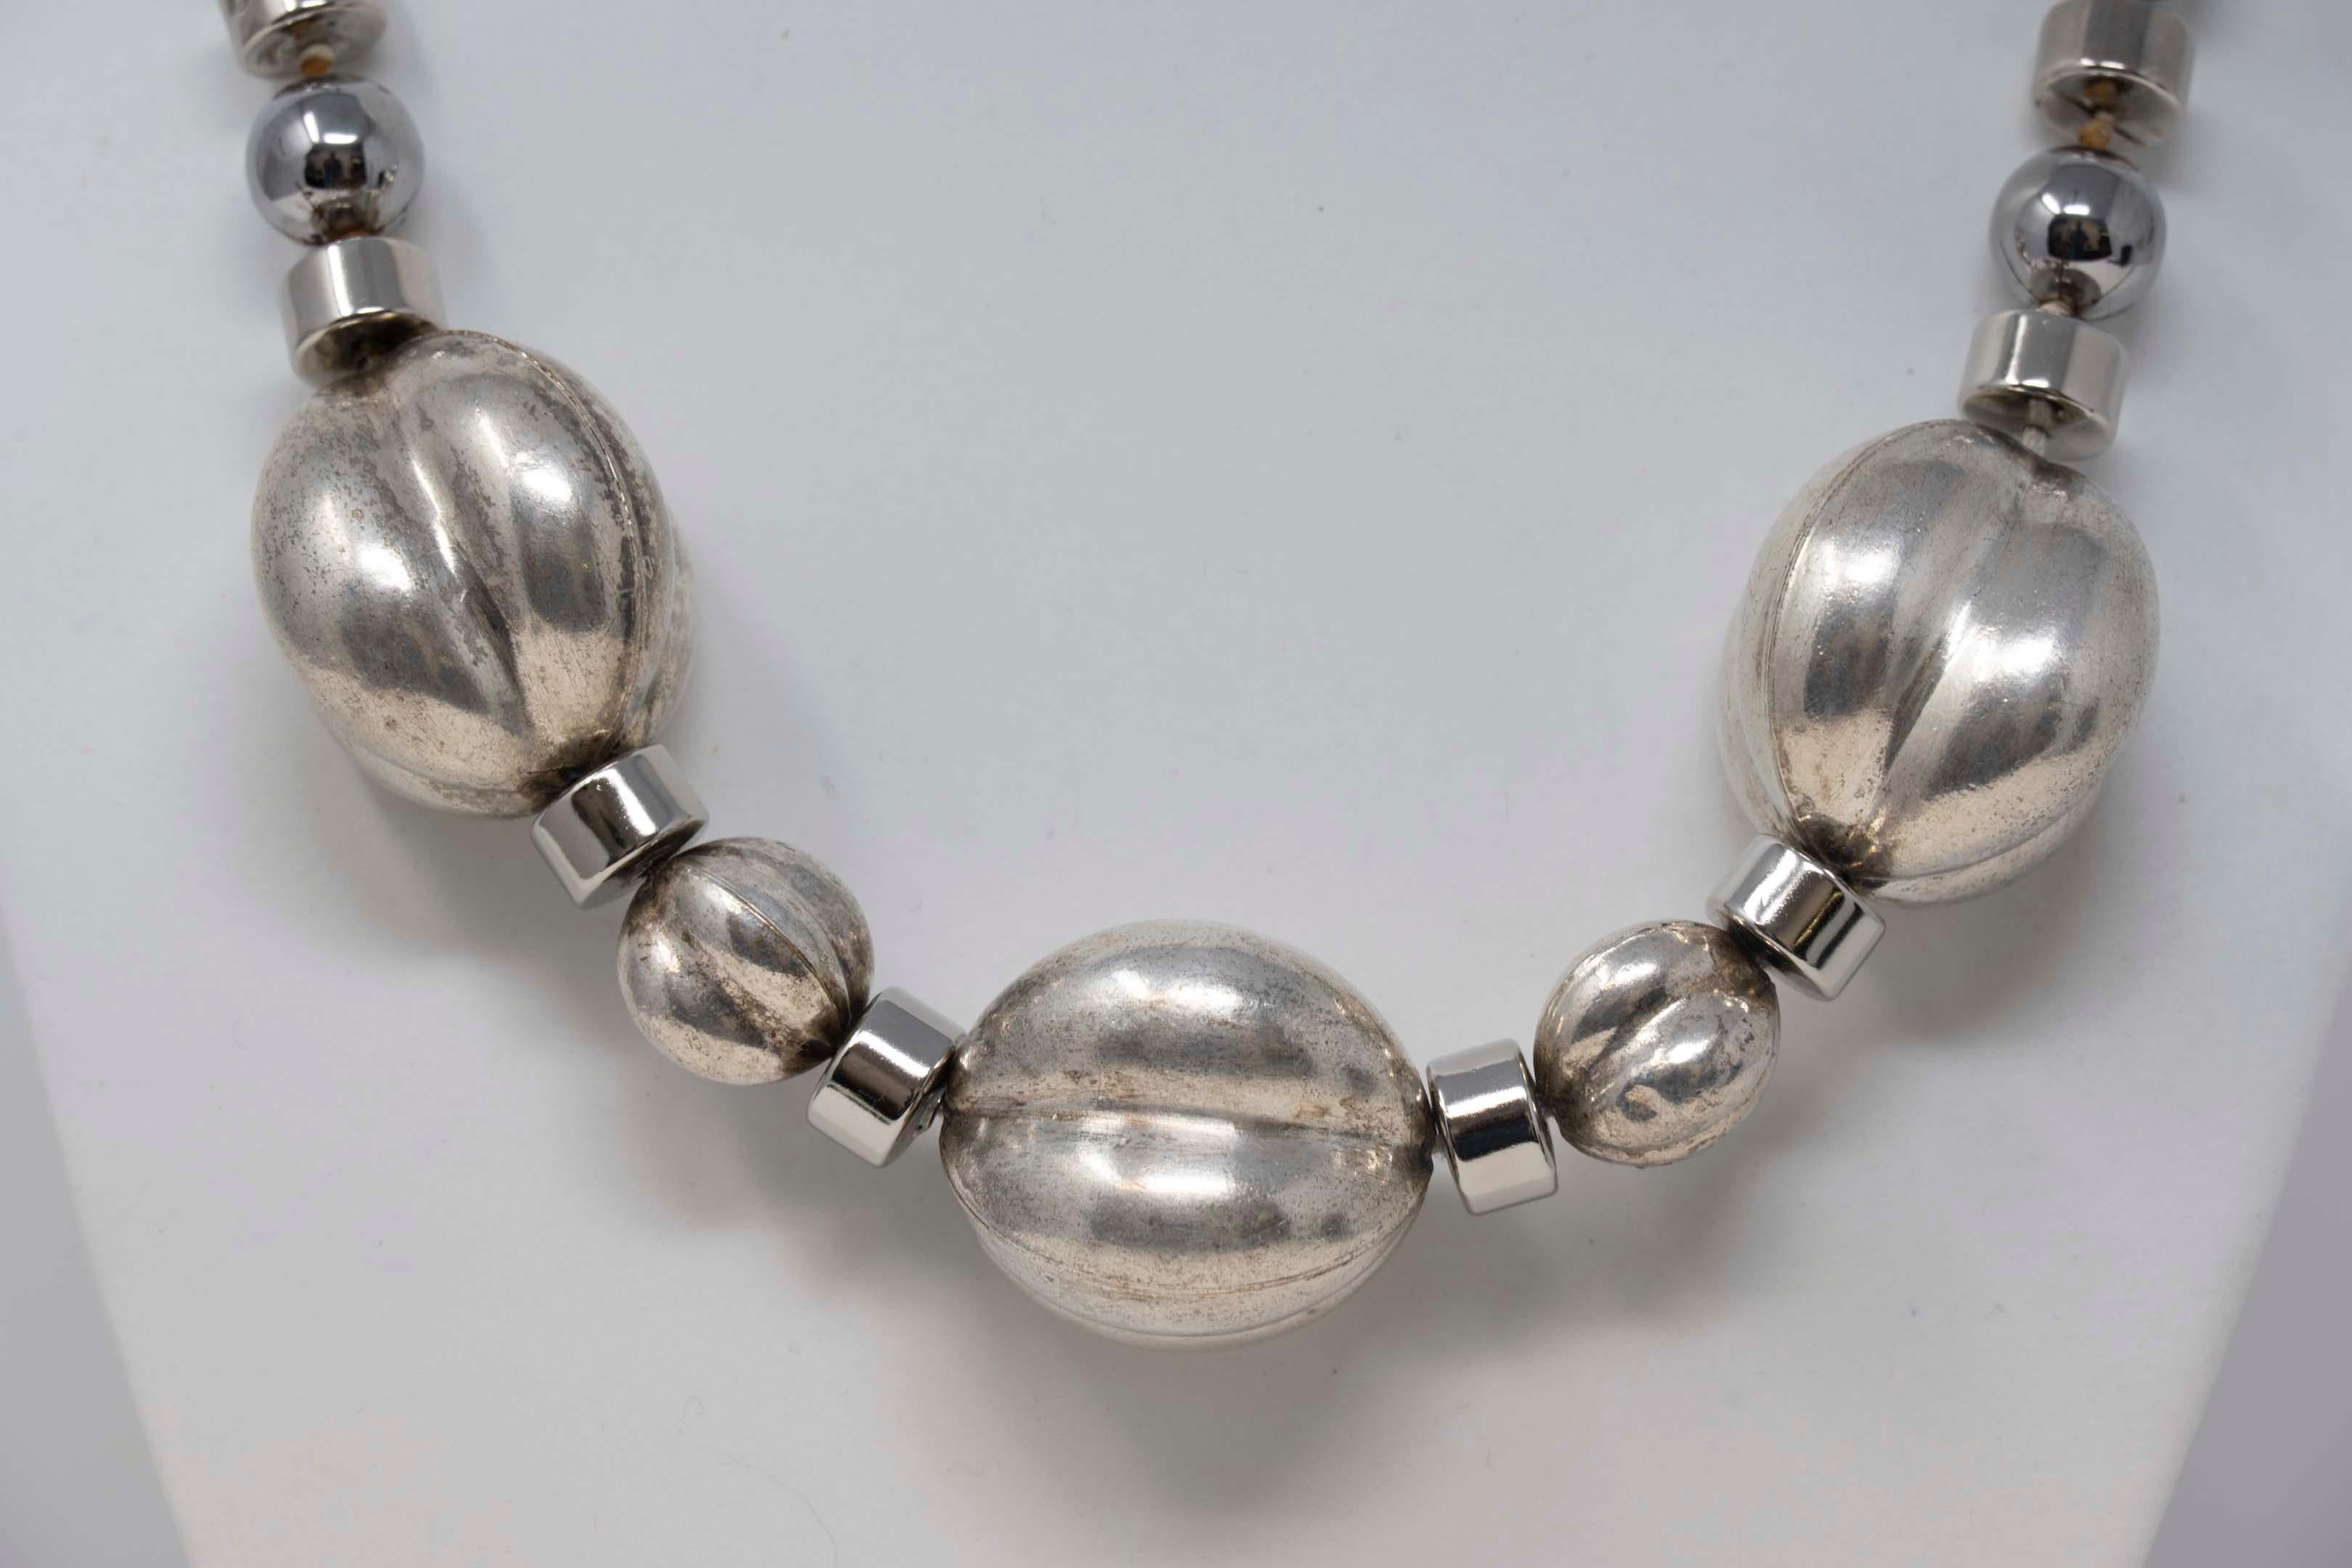 Yves St Laurent silver tone chunky necklace. Measures 18 inches long, wear consistent with age, c.1990. Signed, metal silver tone.
